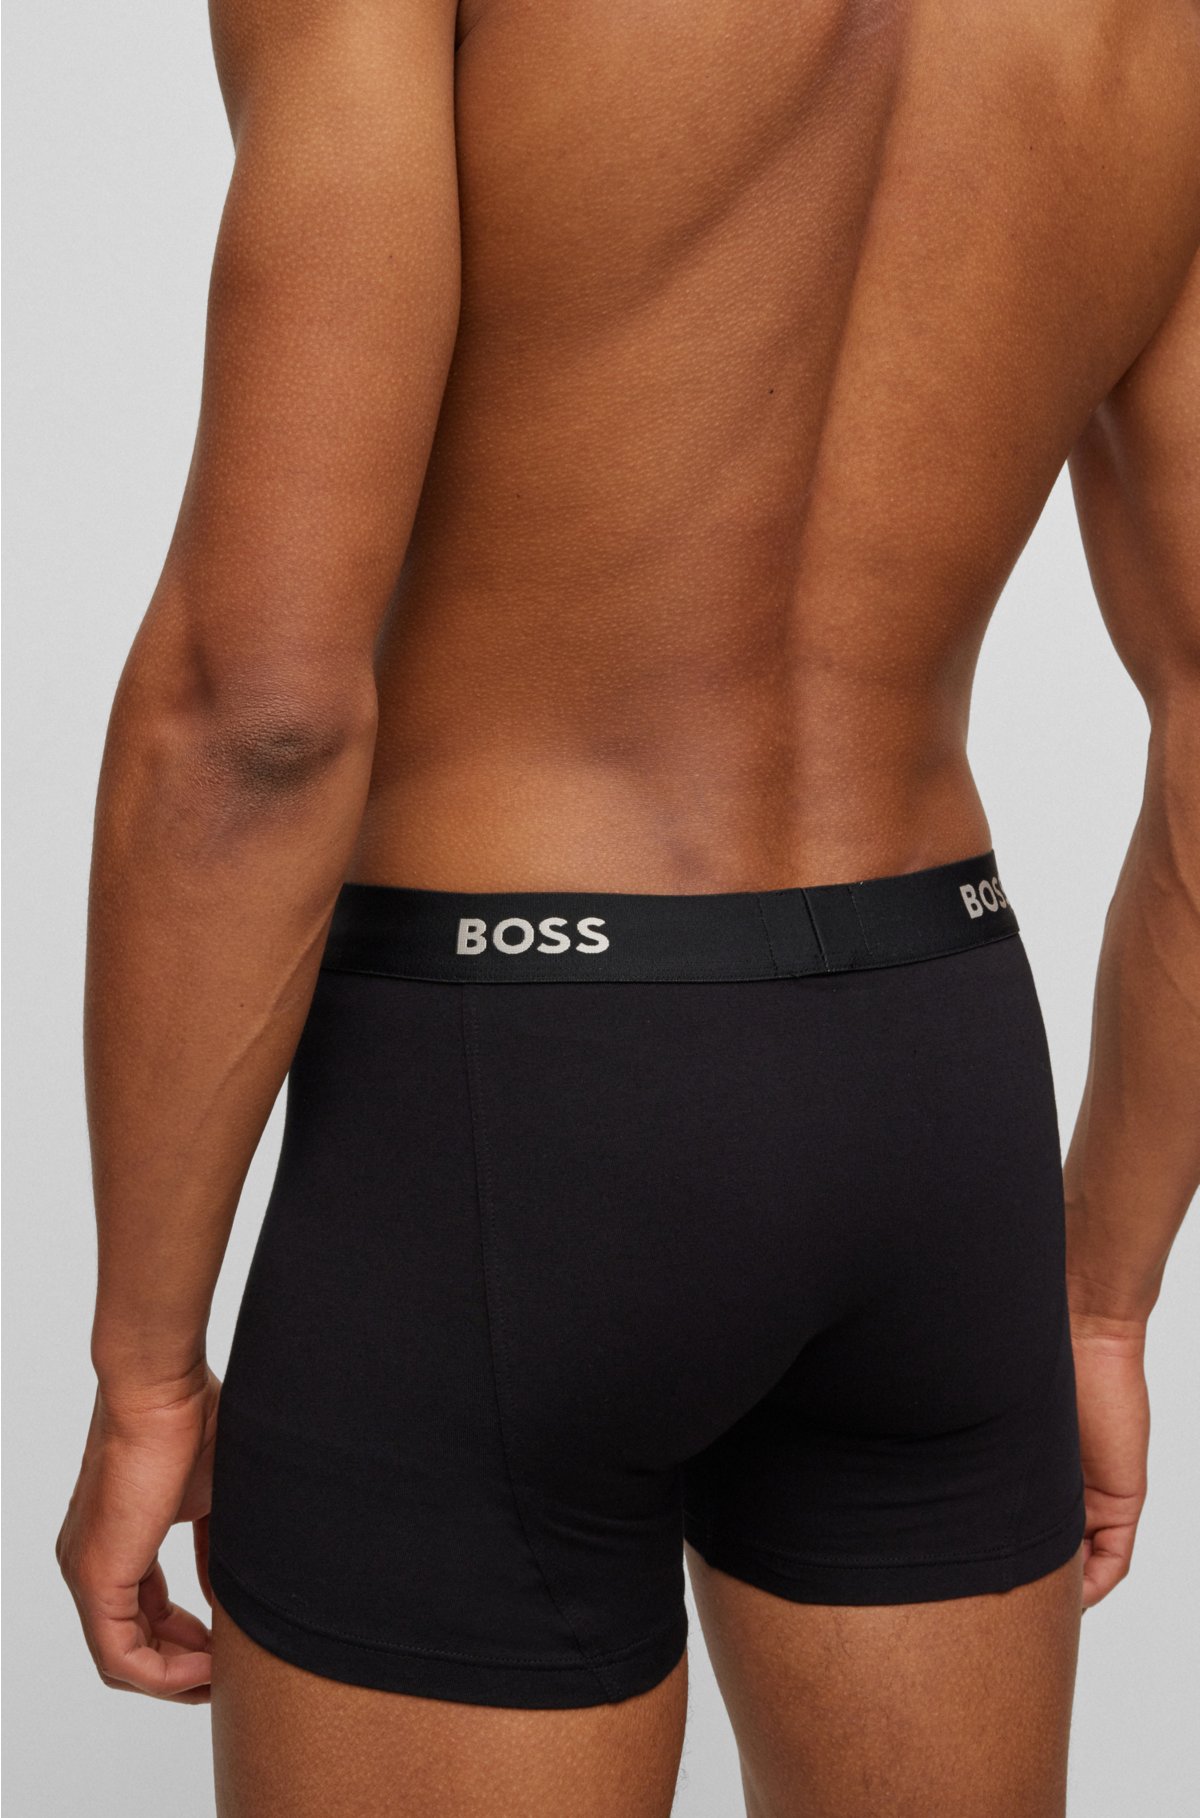 BOSS - Monogram-lace briefs with gold-metal branding